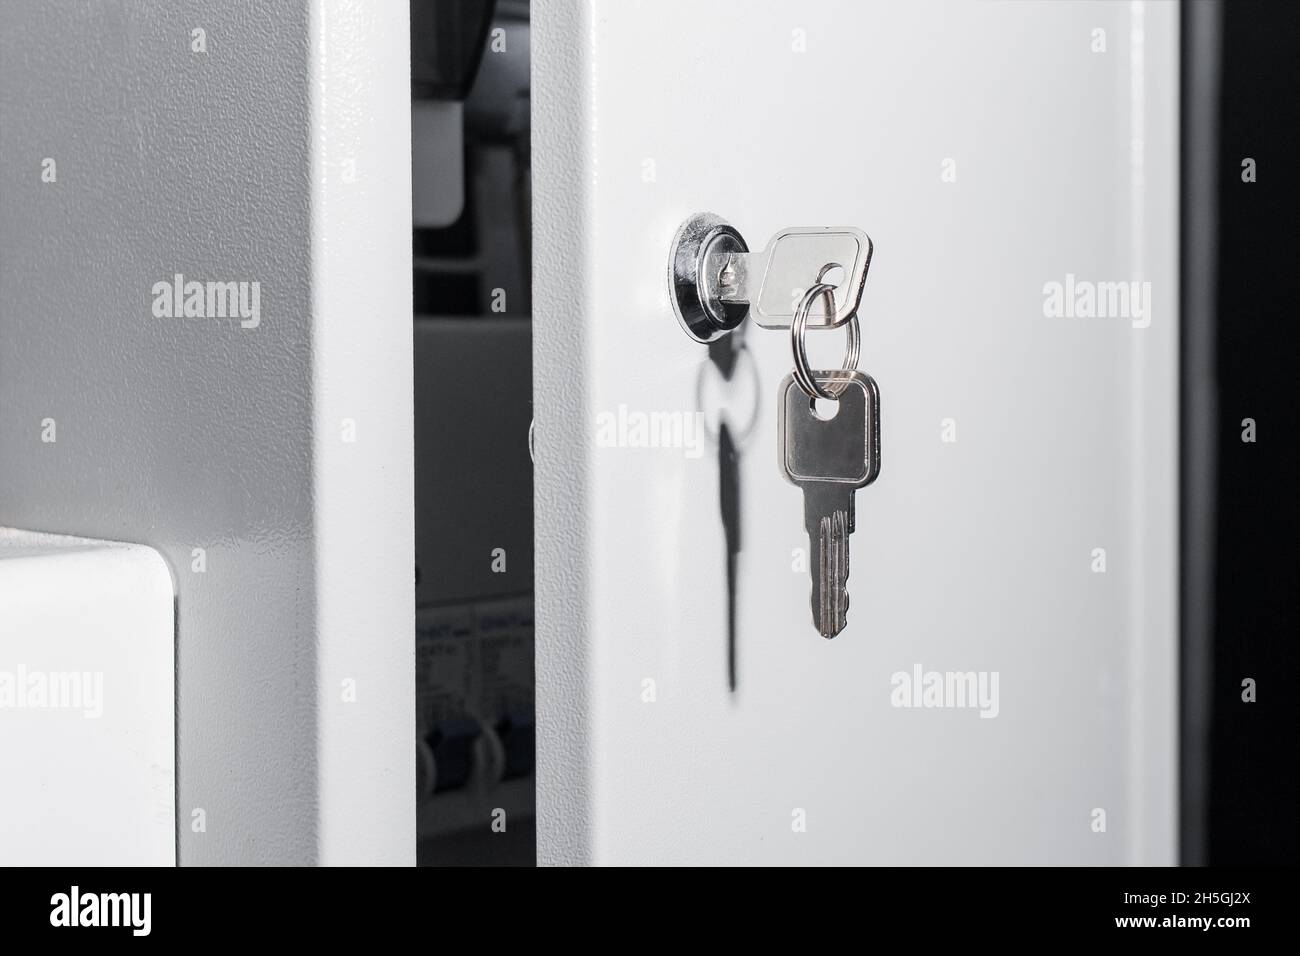 Metal key in the socket connector of the electrical box. Safety and technologies of electrical equipment. Stock Photo